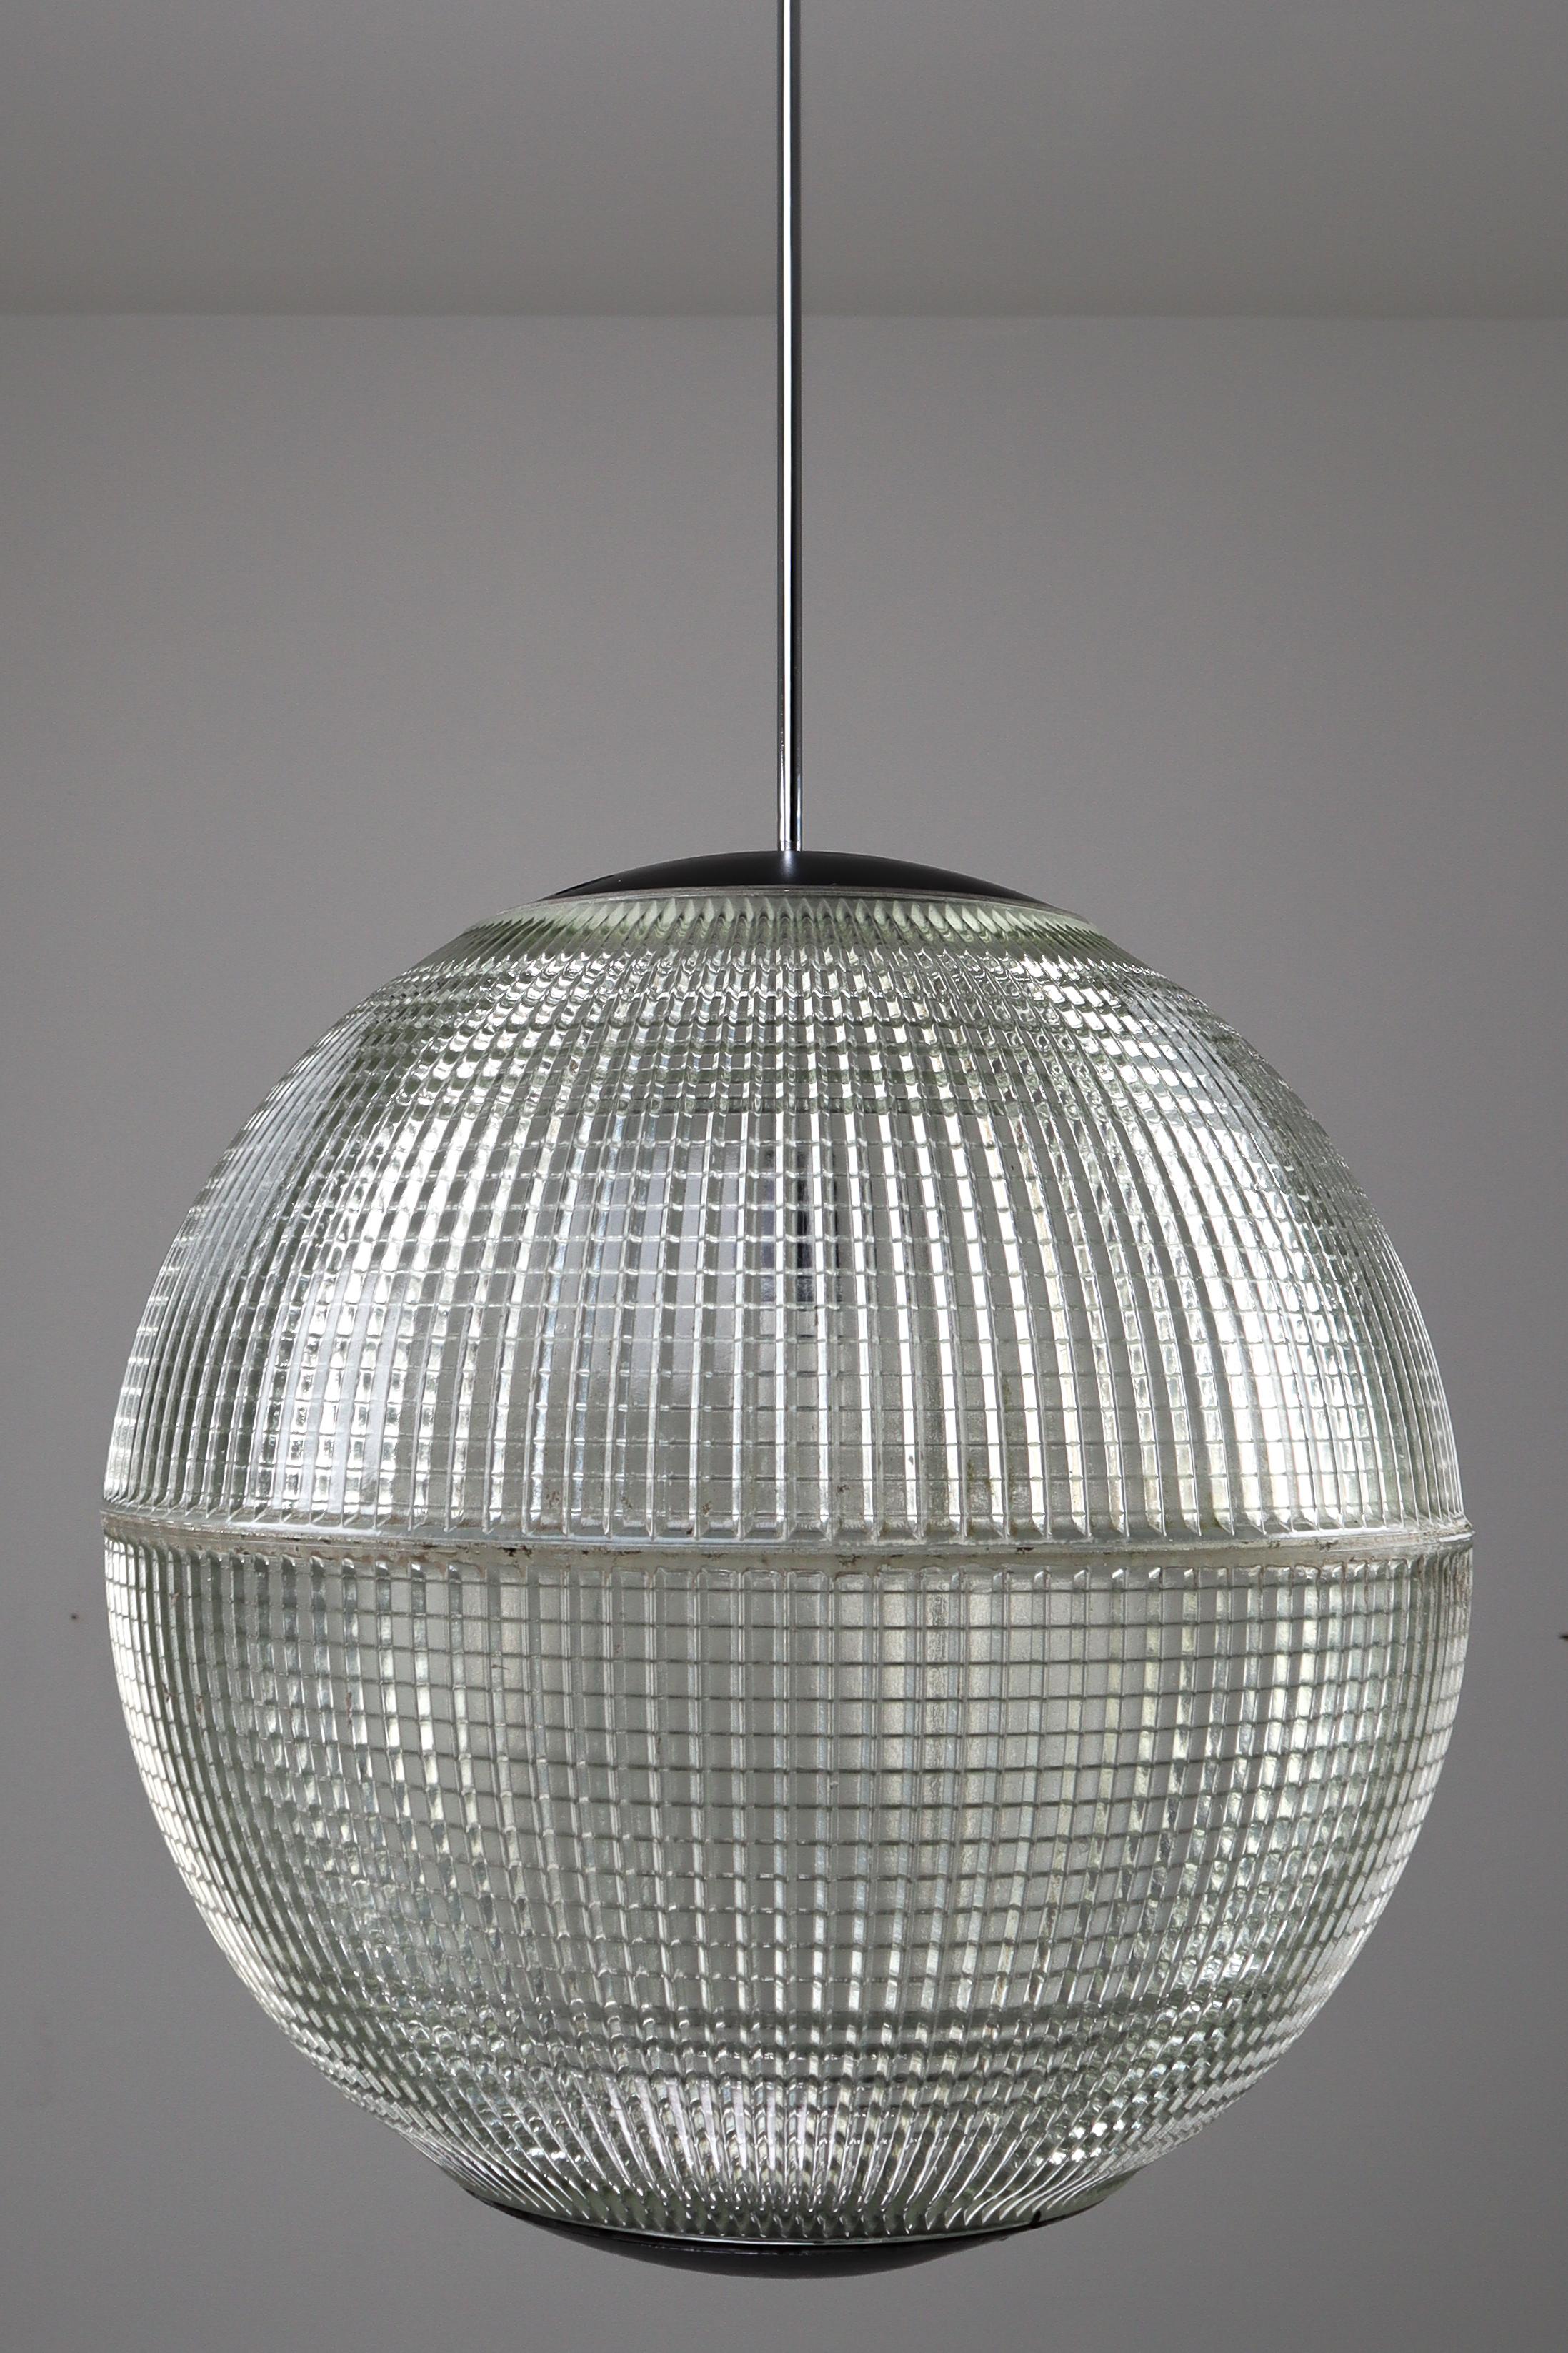 This is a large original late 1960s Paris globe Holophane Street light from Paris, France now turned into a pendant light. The hallmark of Holophane luminaries, or lighting fixtures, is the borosilicate glass reflector / refactor. The glass prisms